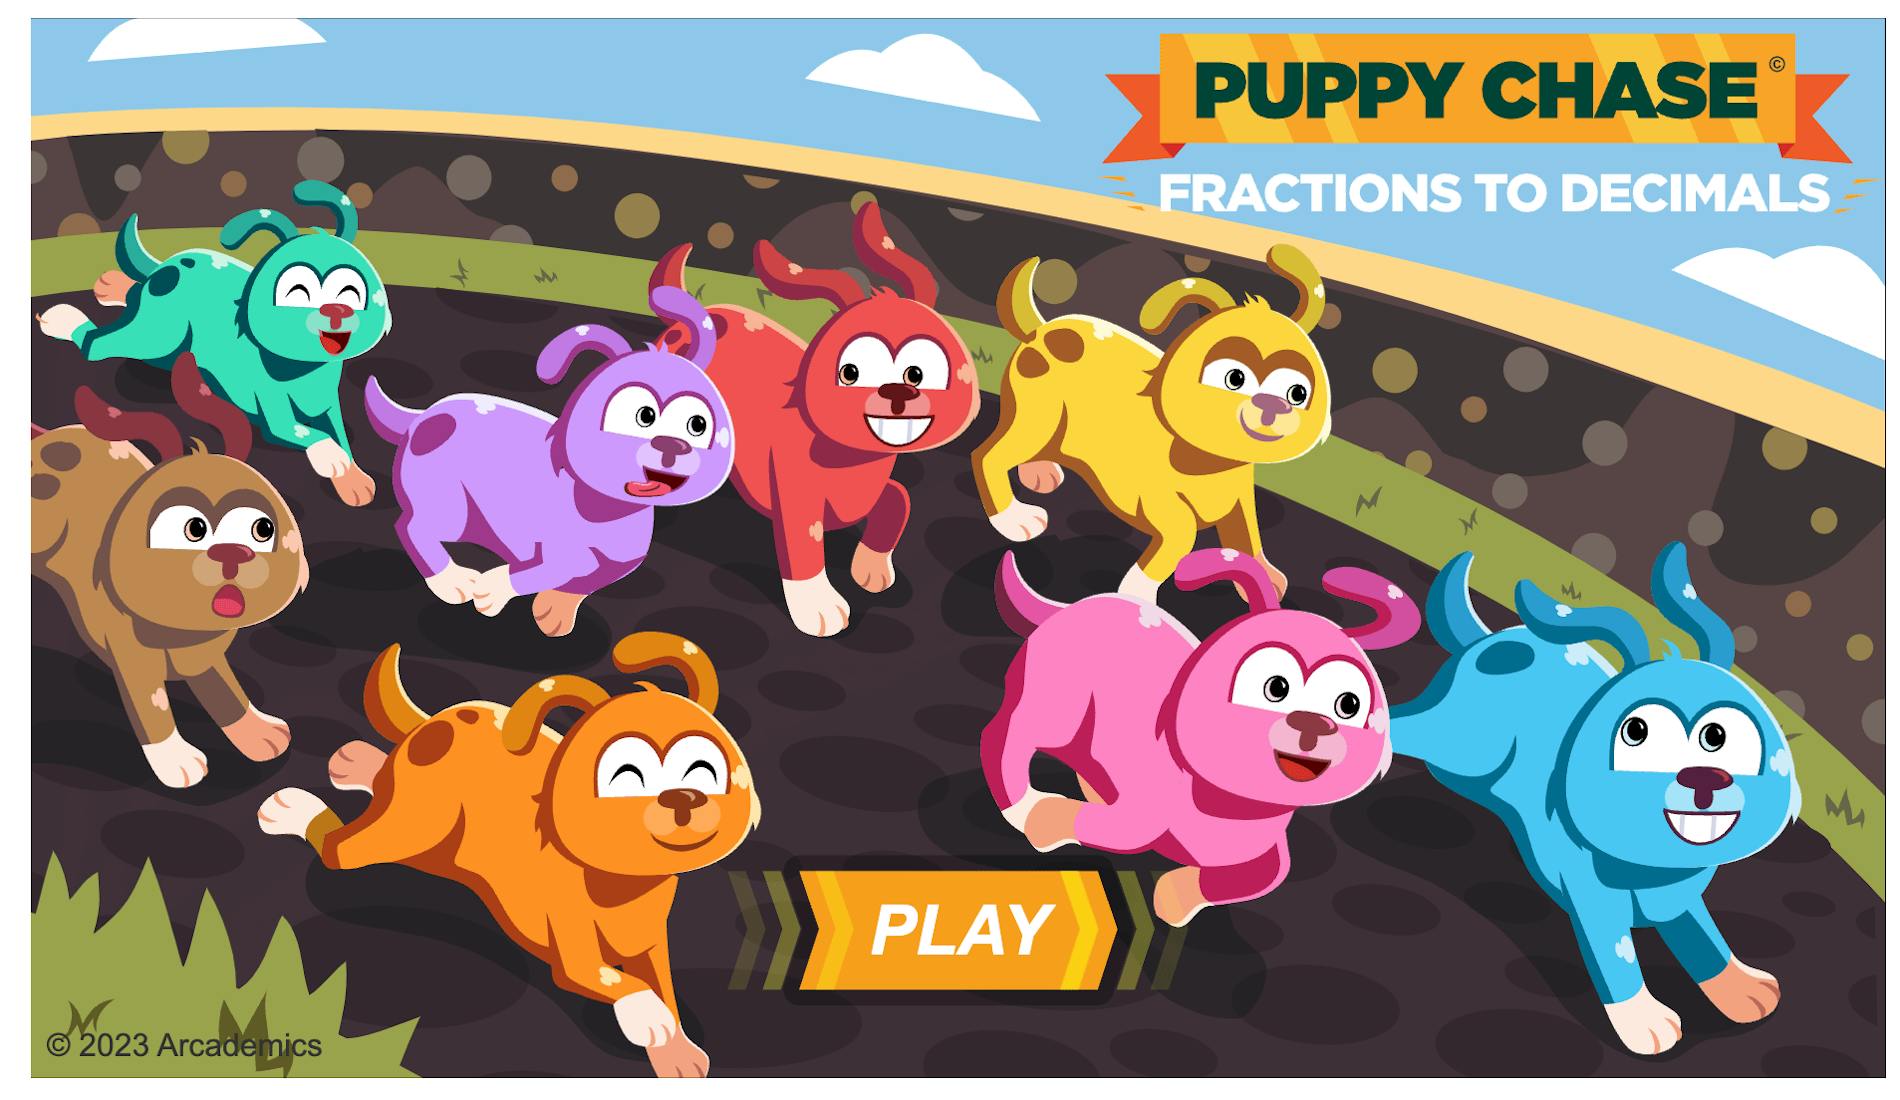 Home screen of Puppy Chase fractions to decimals game.